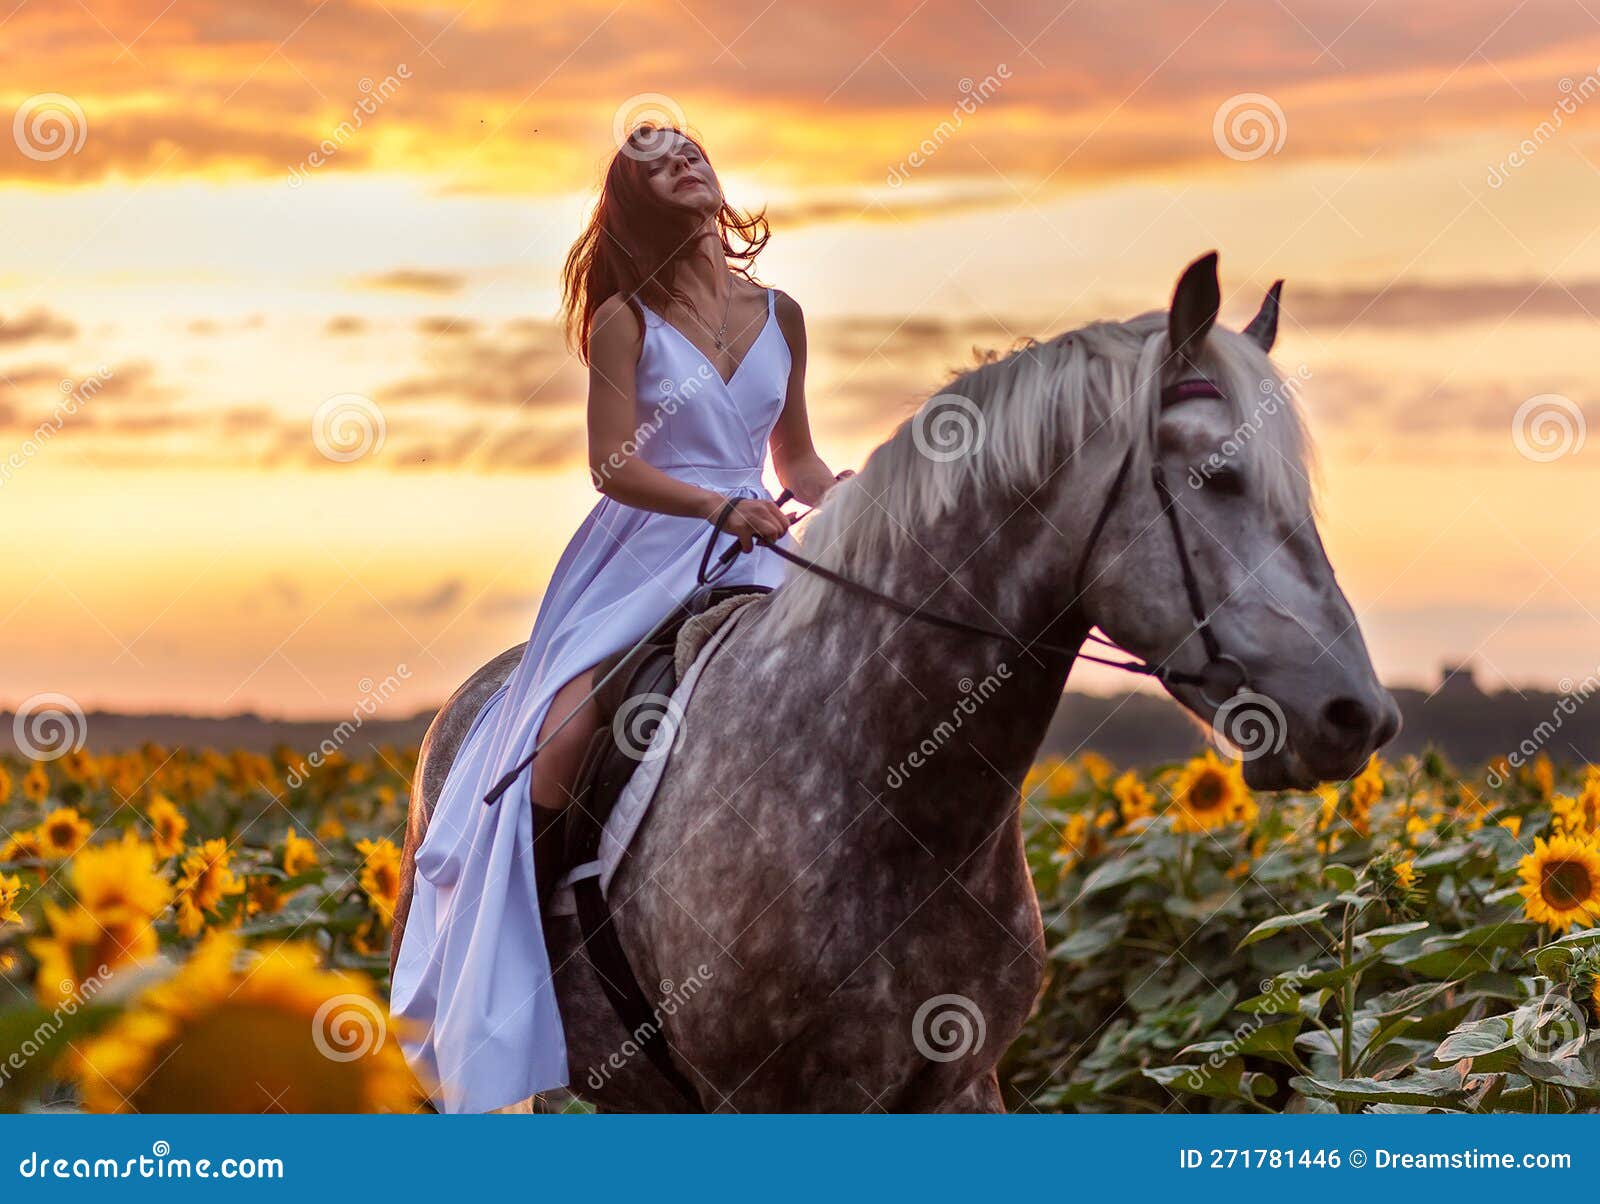 beautyful woman with horse on nature